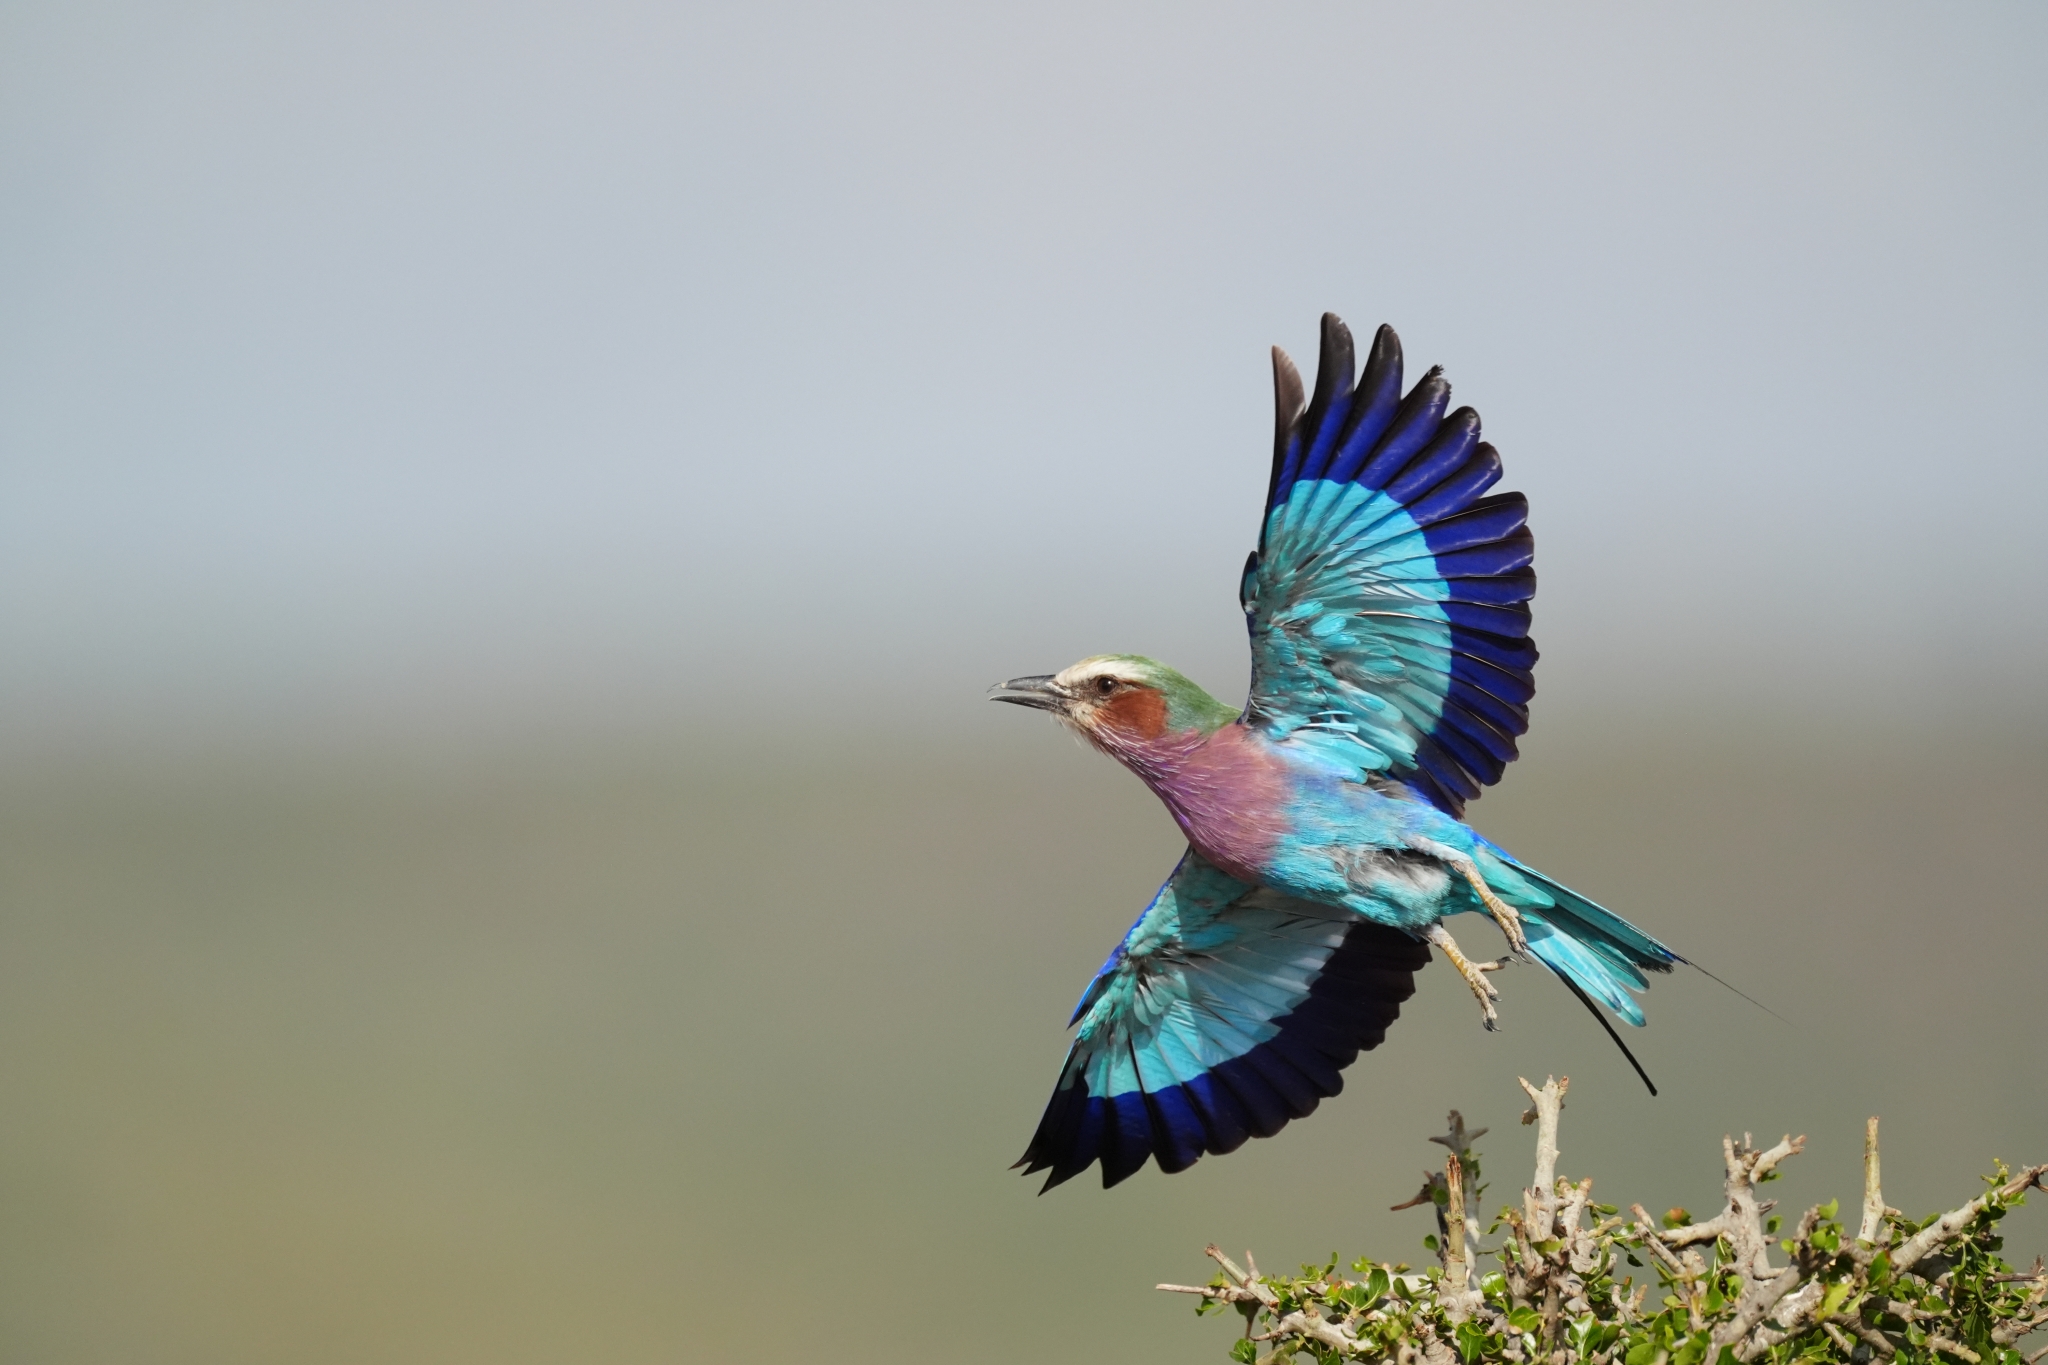 Blue and pink bird in flight with deep bokeh background